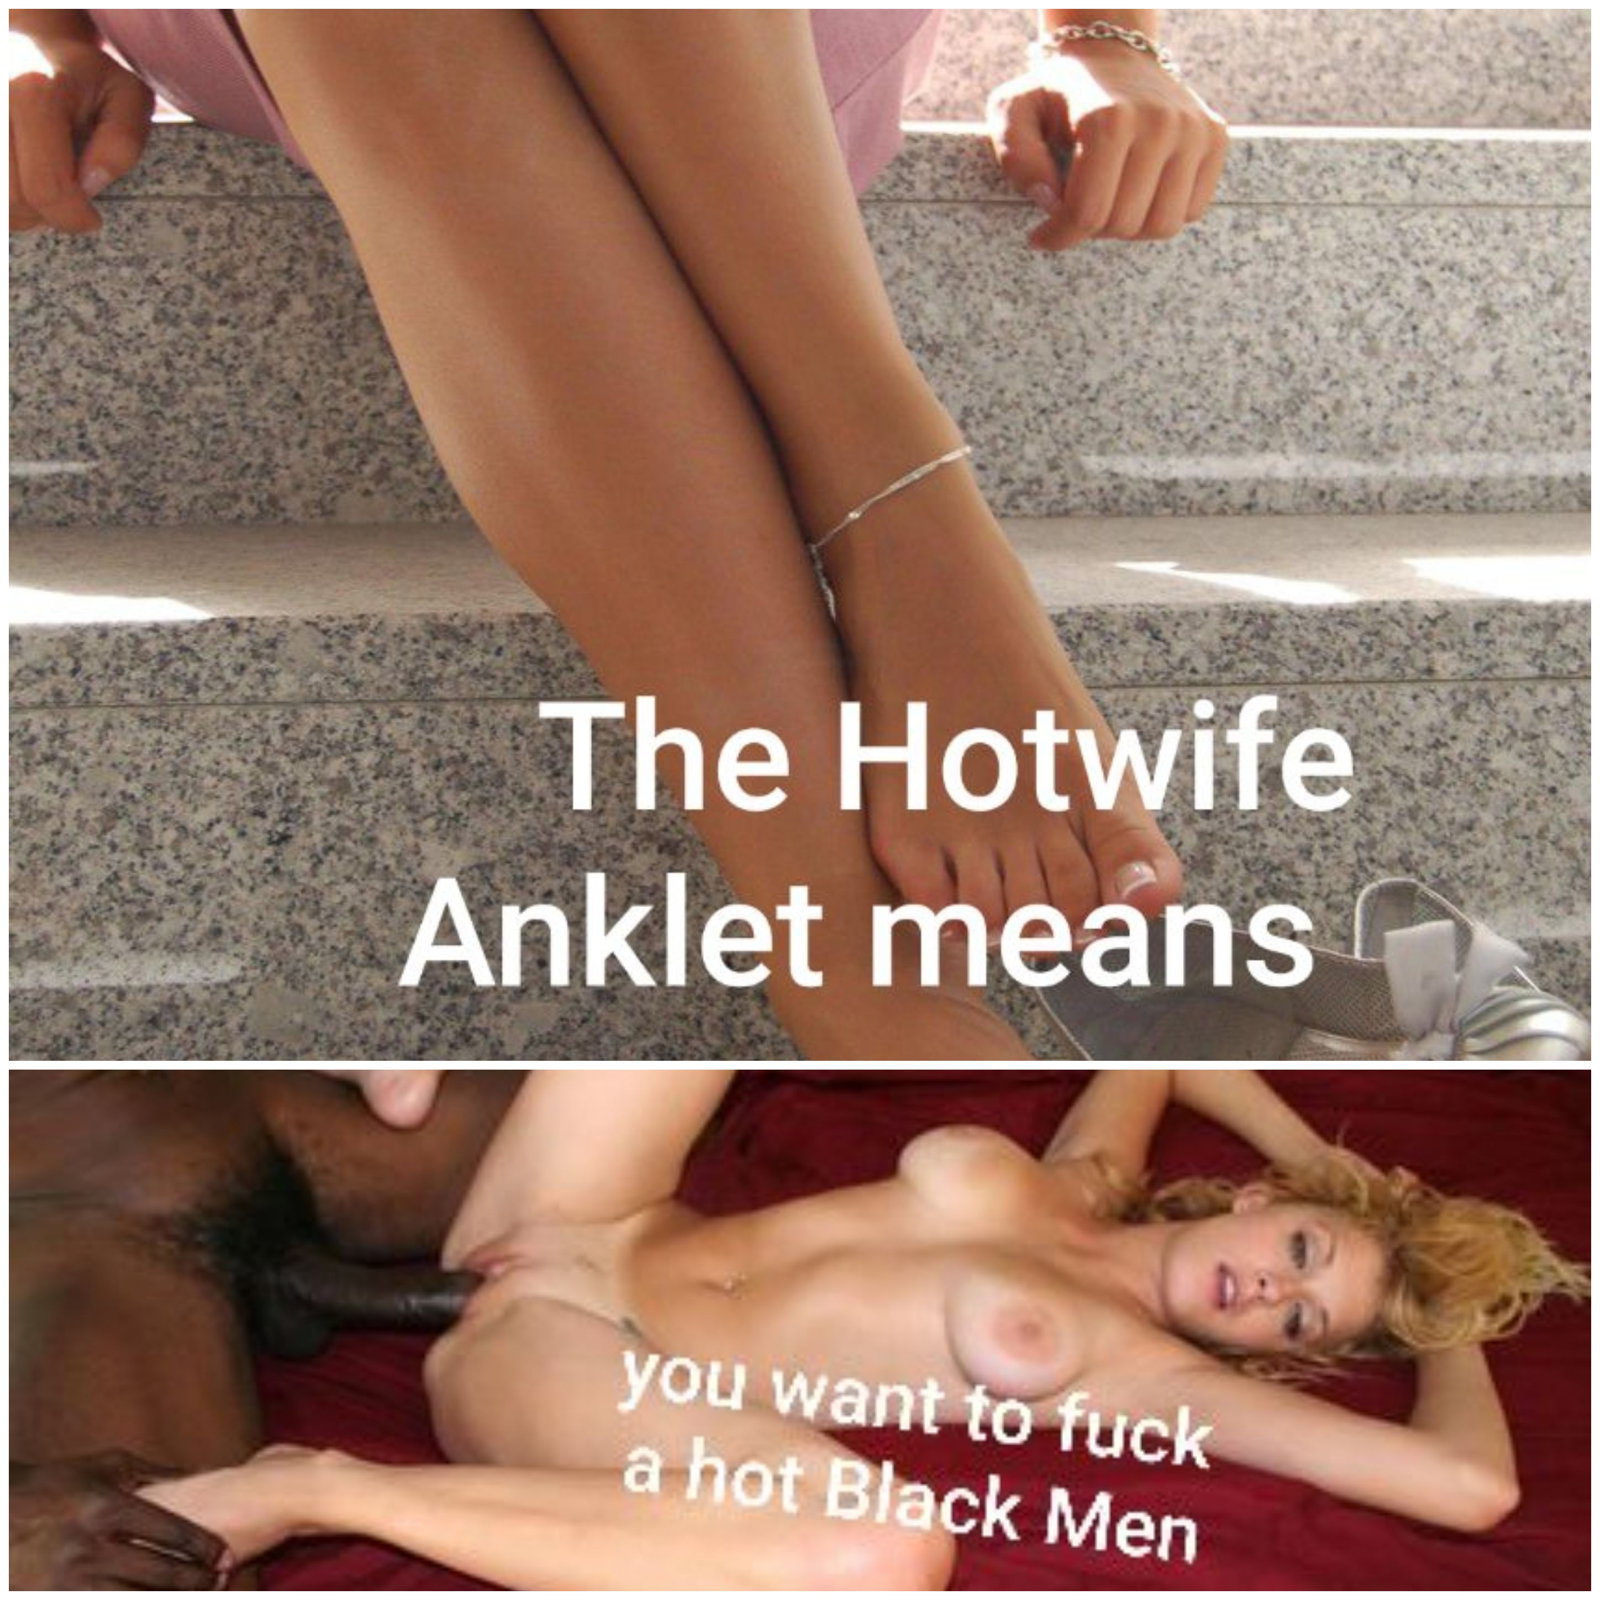 Photo by Hotwife&BBCFantasy with the username @Lux-cock,  September 18, 2019 at 4:35 AM. The post is about the topic Hotwife Life, anklets and other kink